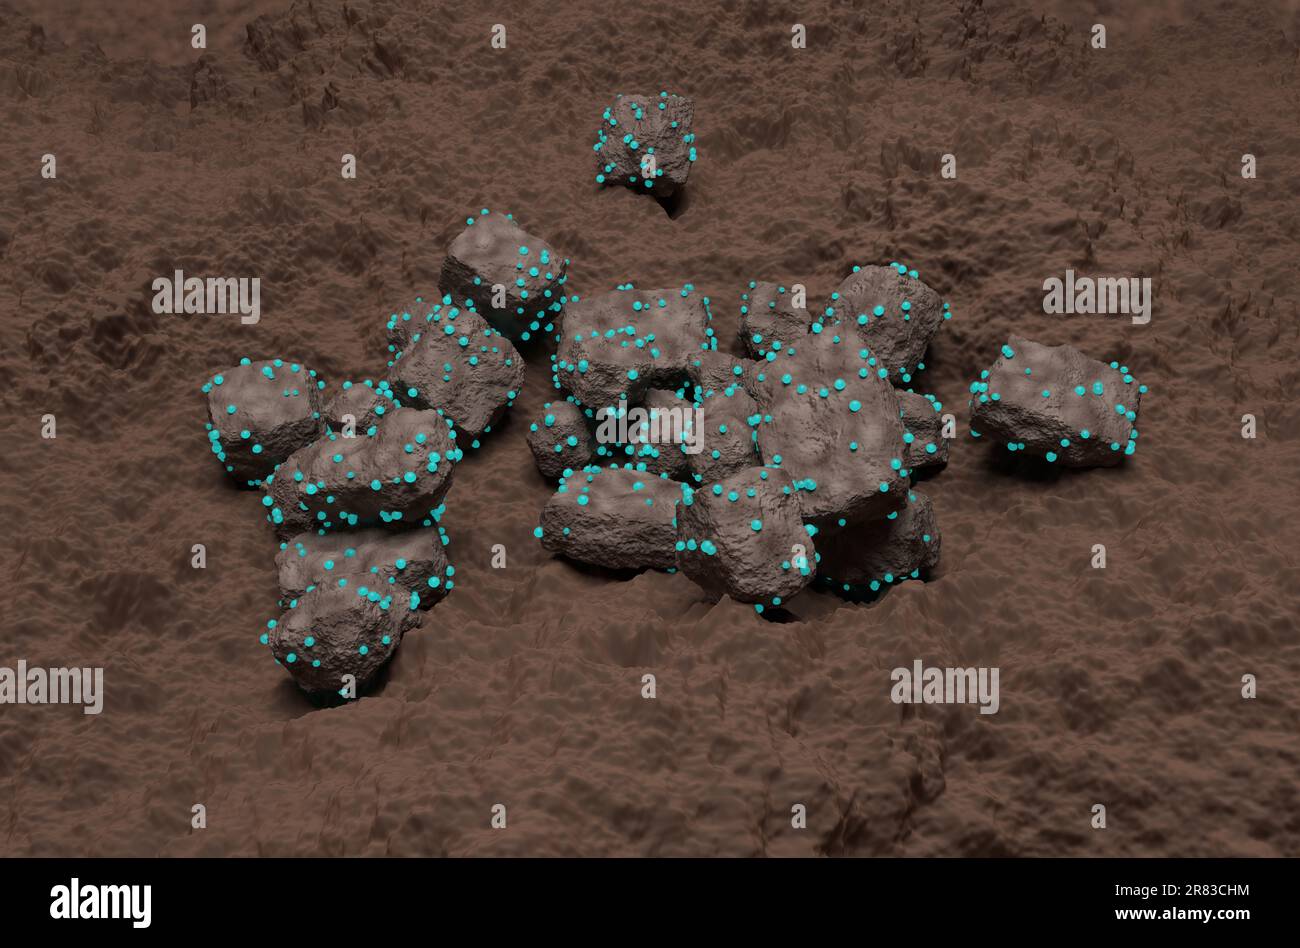 Rock captured the carbon dioxide gas bubbles - isometric view 3d illustration Stock Photo